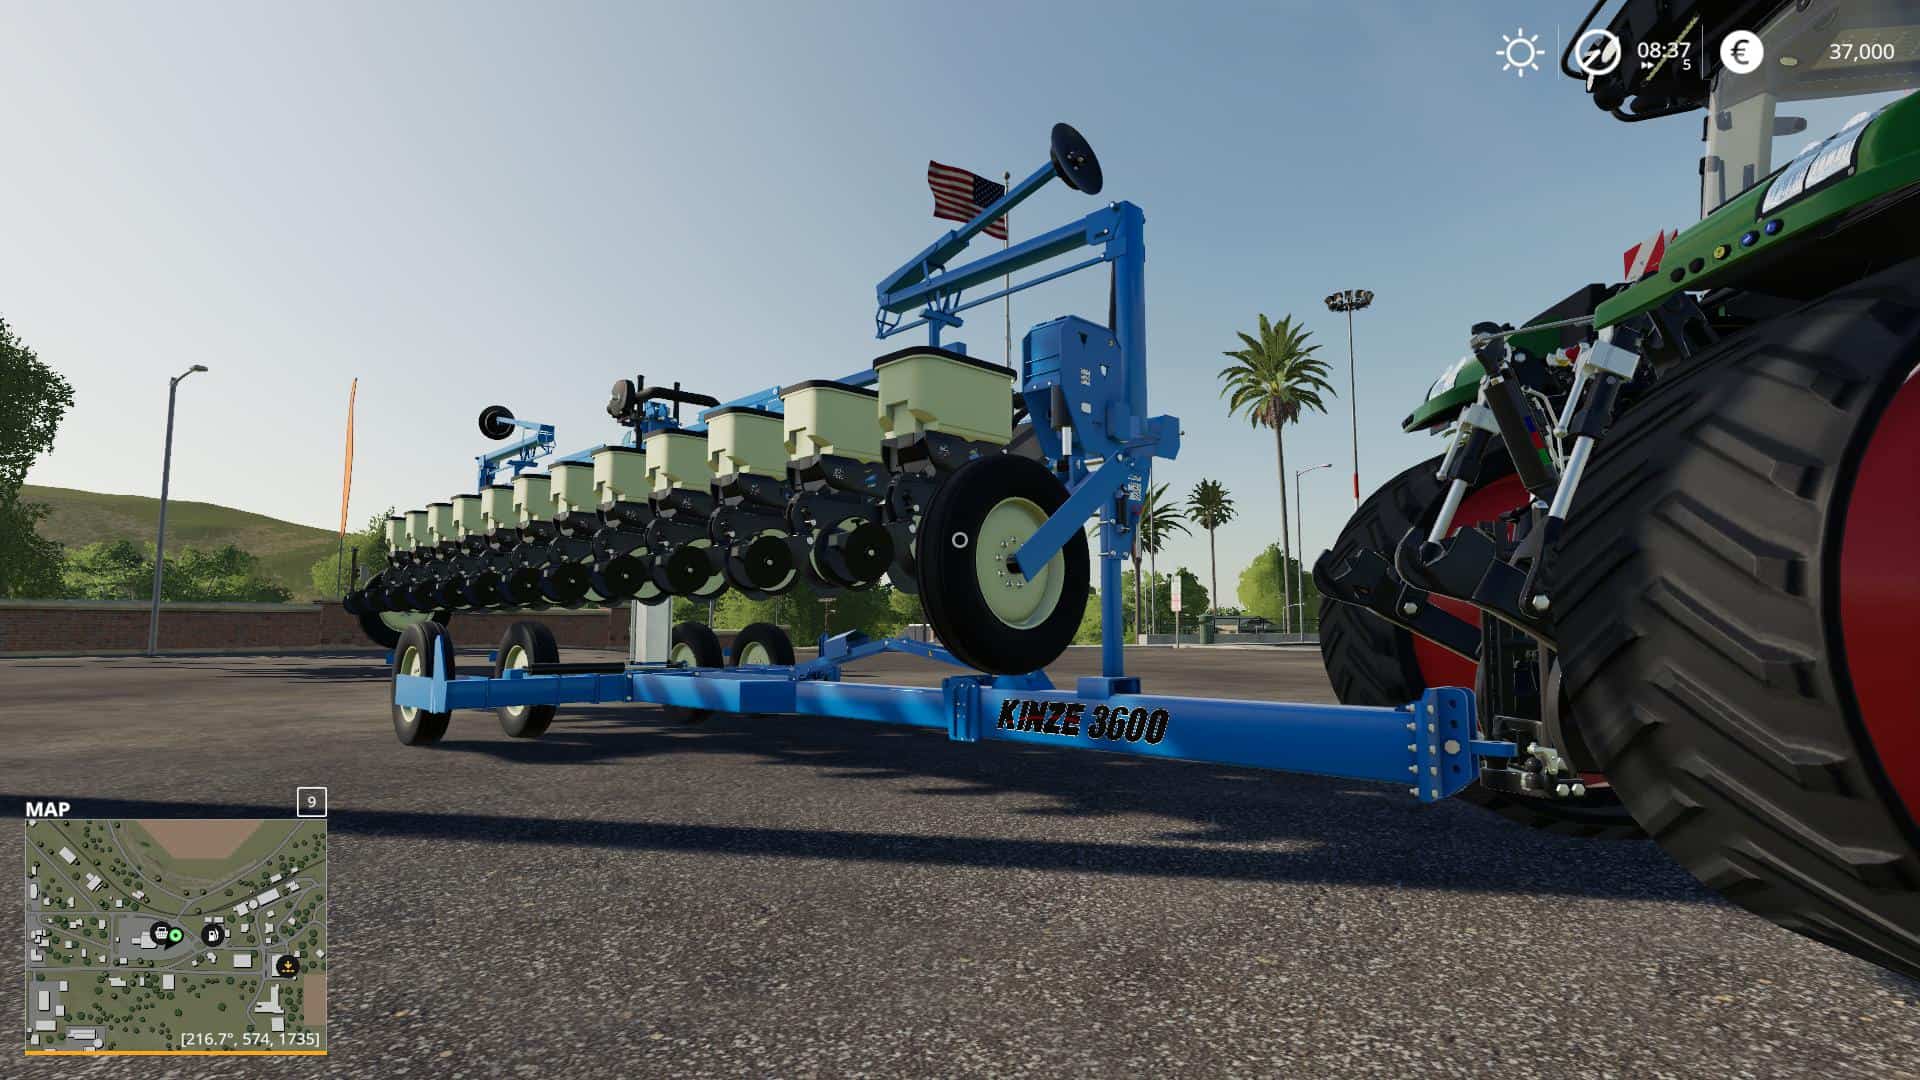 Kinze 3600 12 Row Planter has several options for seedboxes. 